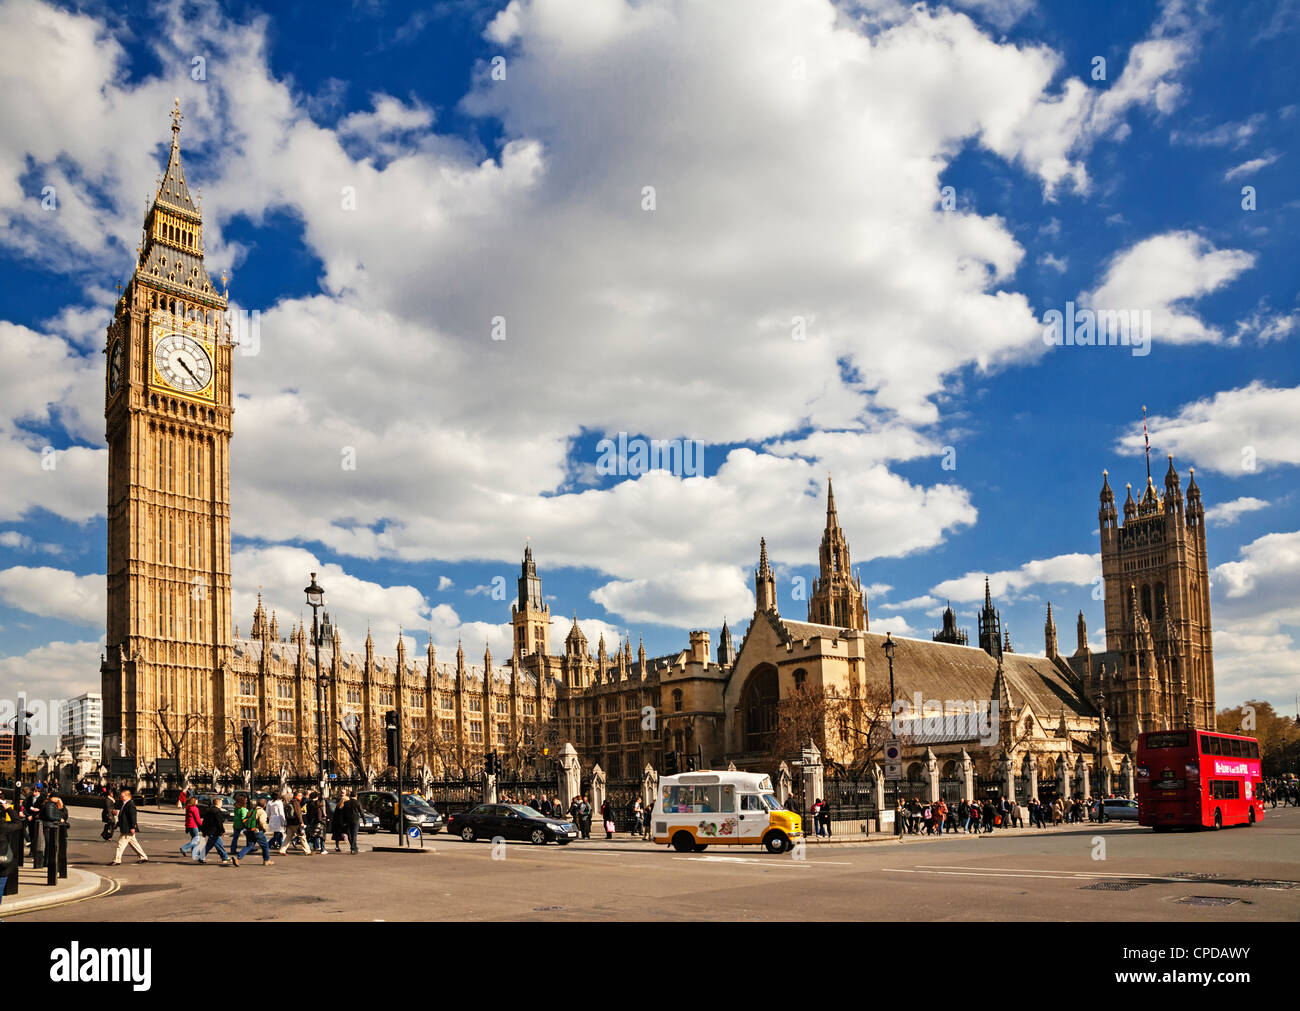 The Palace of Westminster, British Parliament building, London, England. Stock Photo